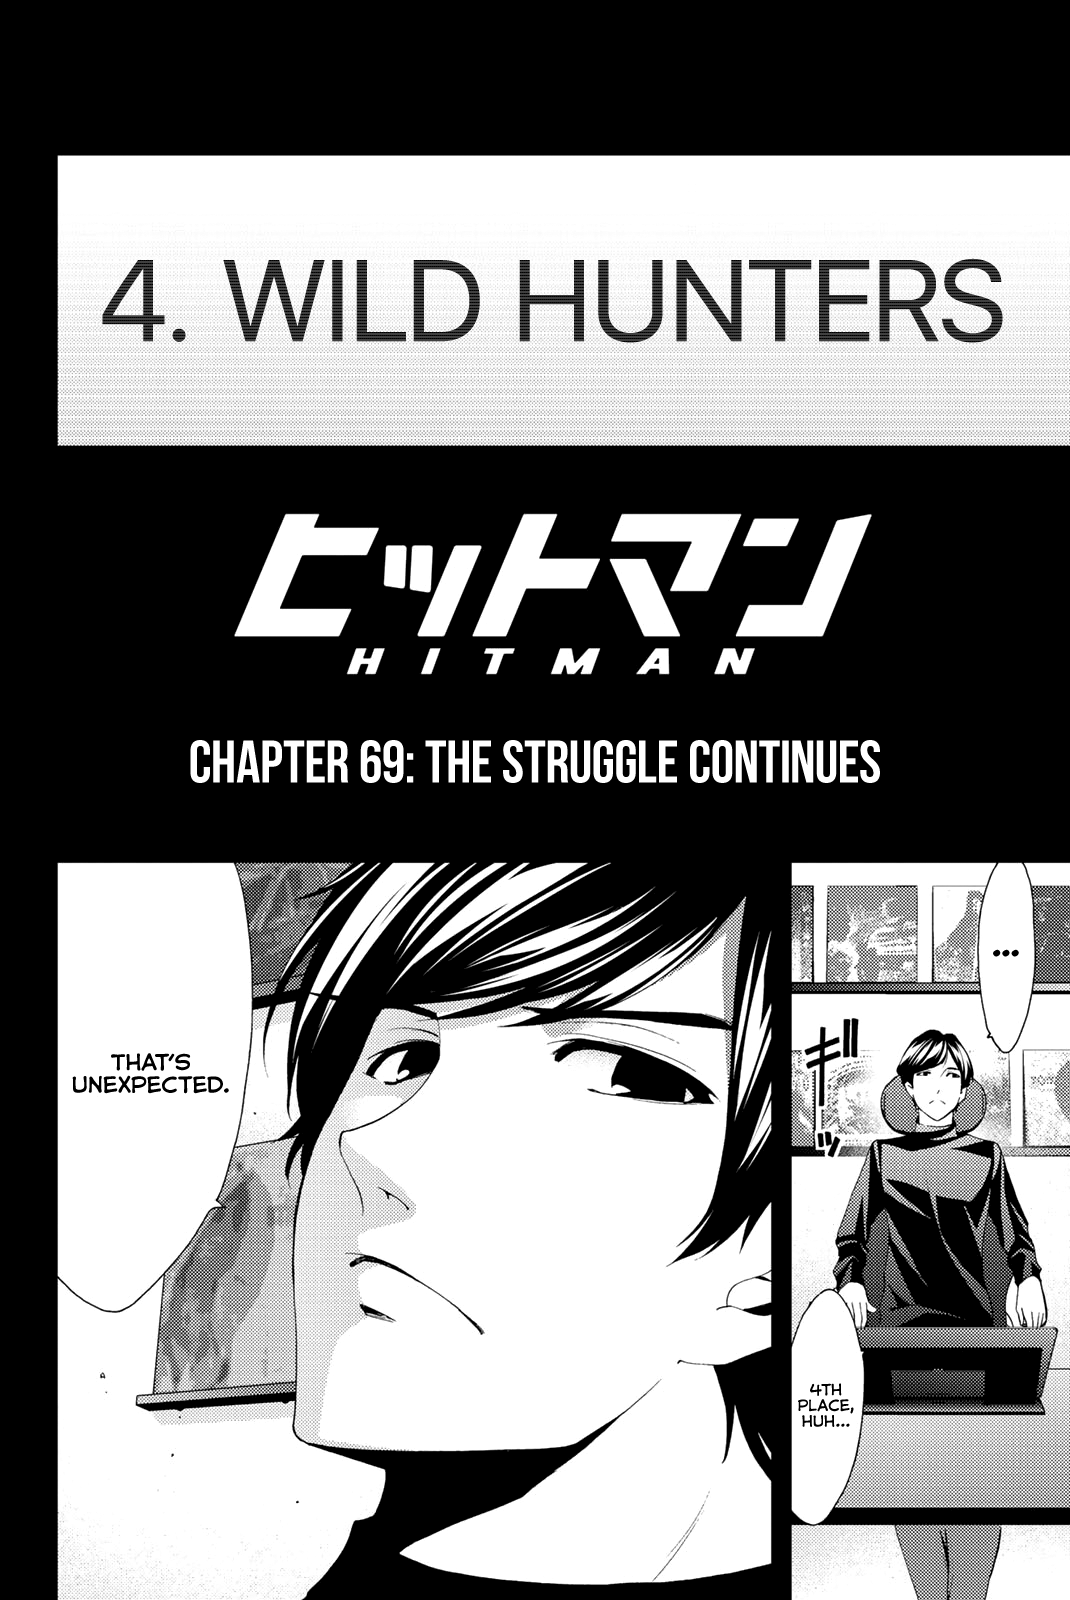 Hitman (Kouji Seo) Chapter 69: The Struggle Continues - Picture 3